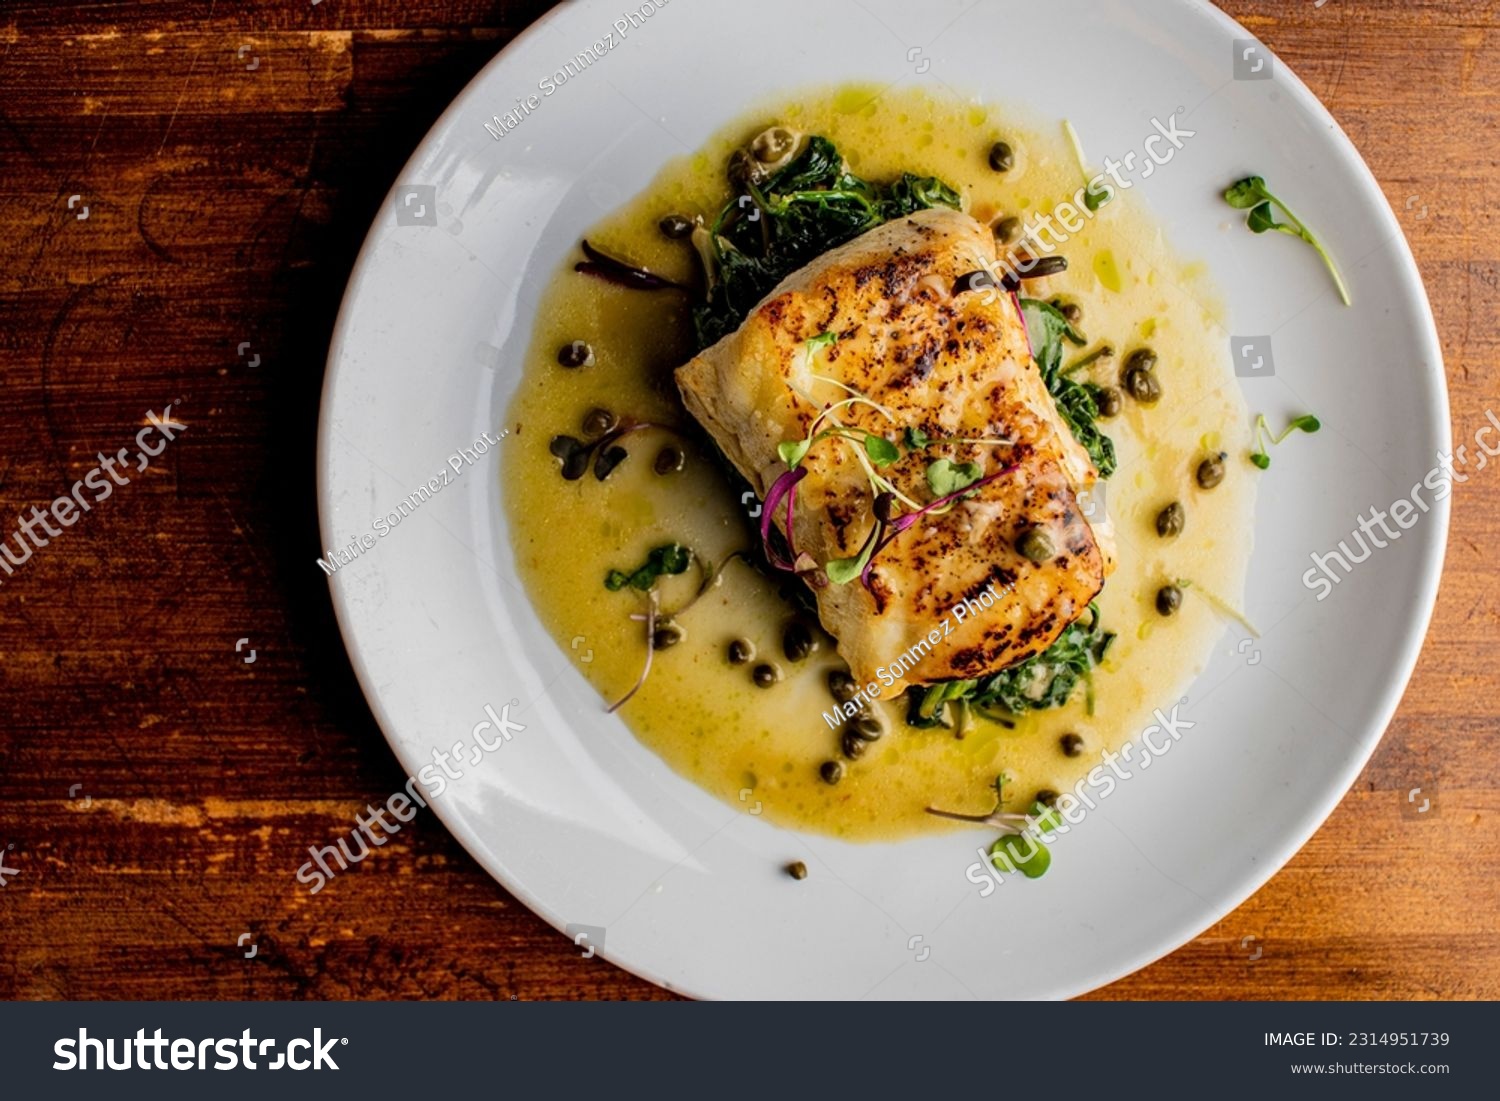 Grilled fish. Grilled red snapper. Traditional Classic American or French Seafood Restaurant menu item, whole grilled fresh caught halibut or sea bream Fish served with chilled gazpacho and peppers. #2314951739